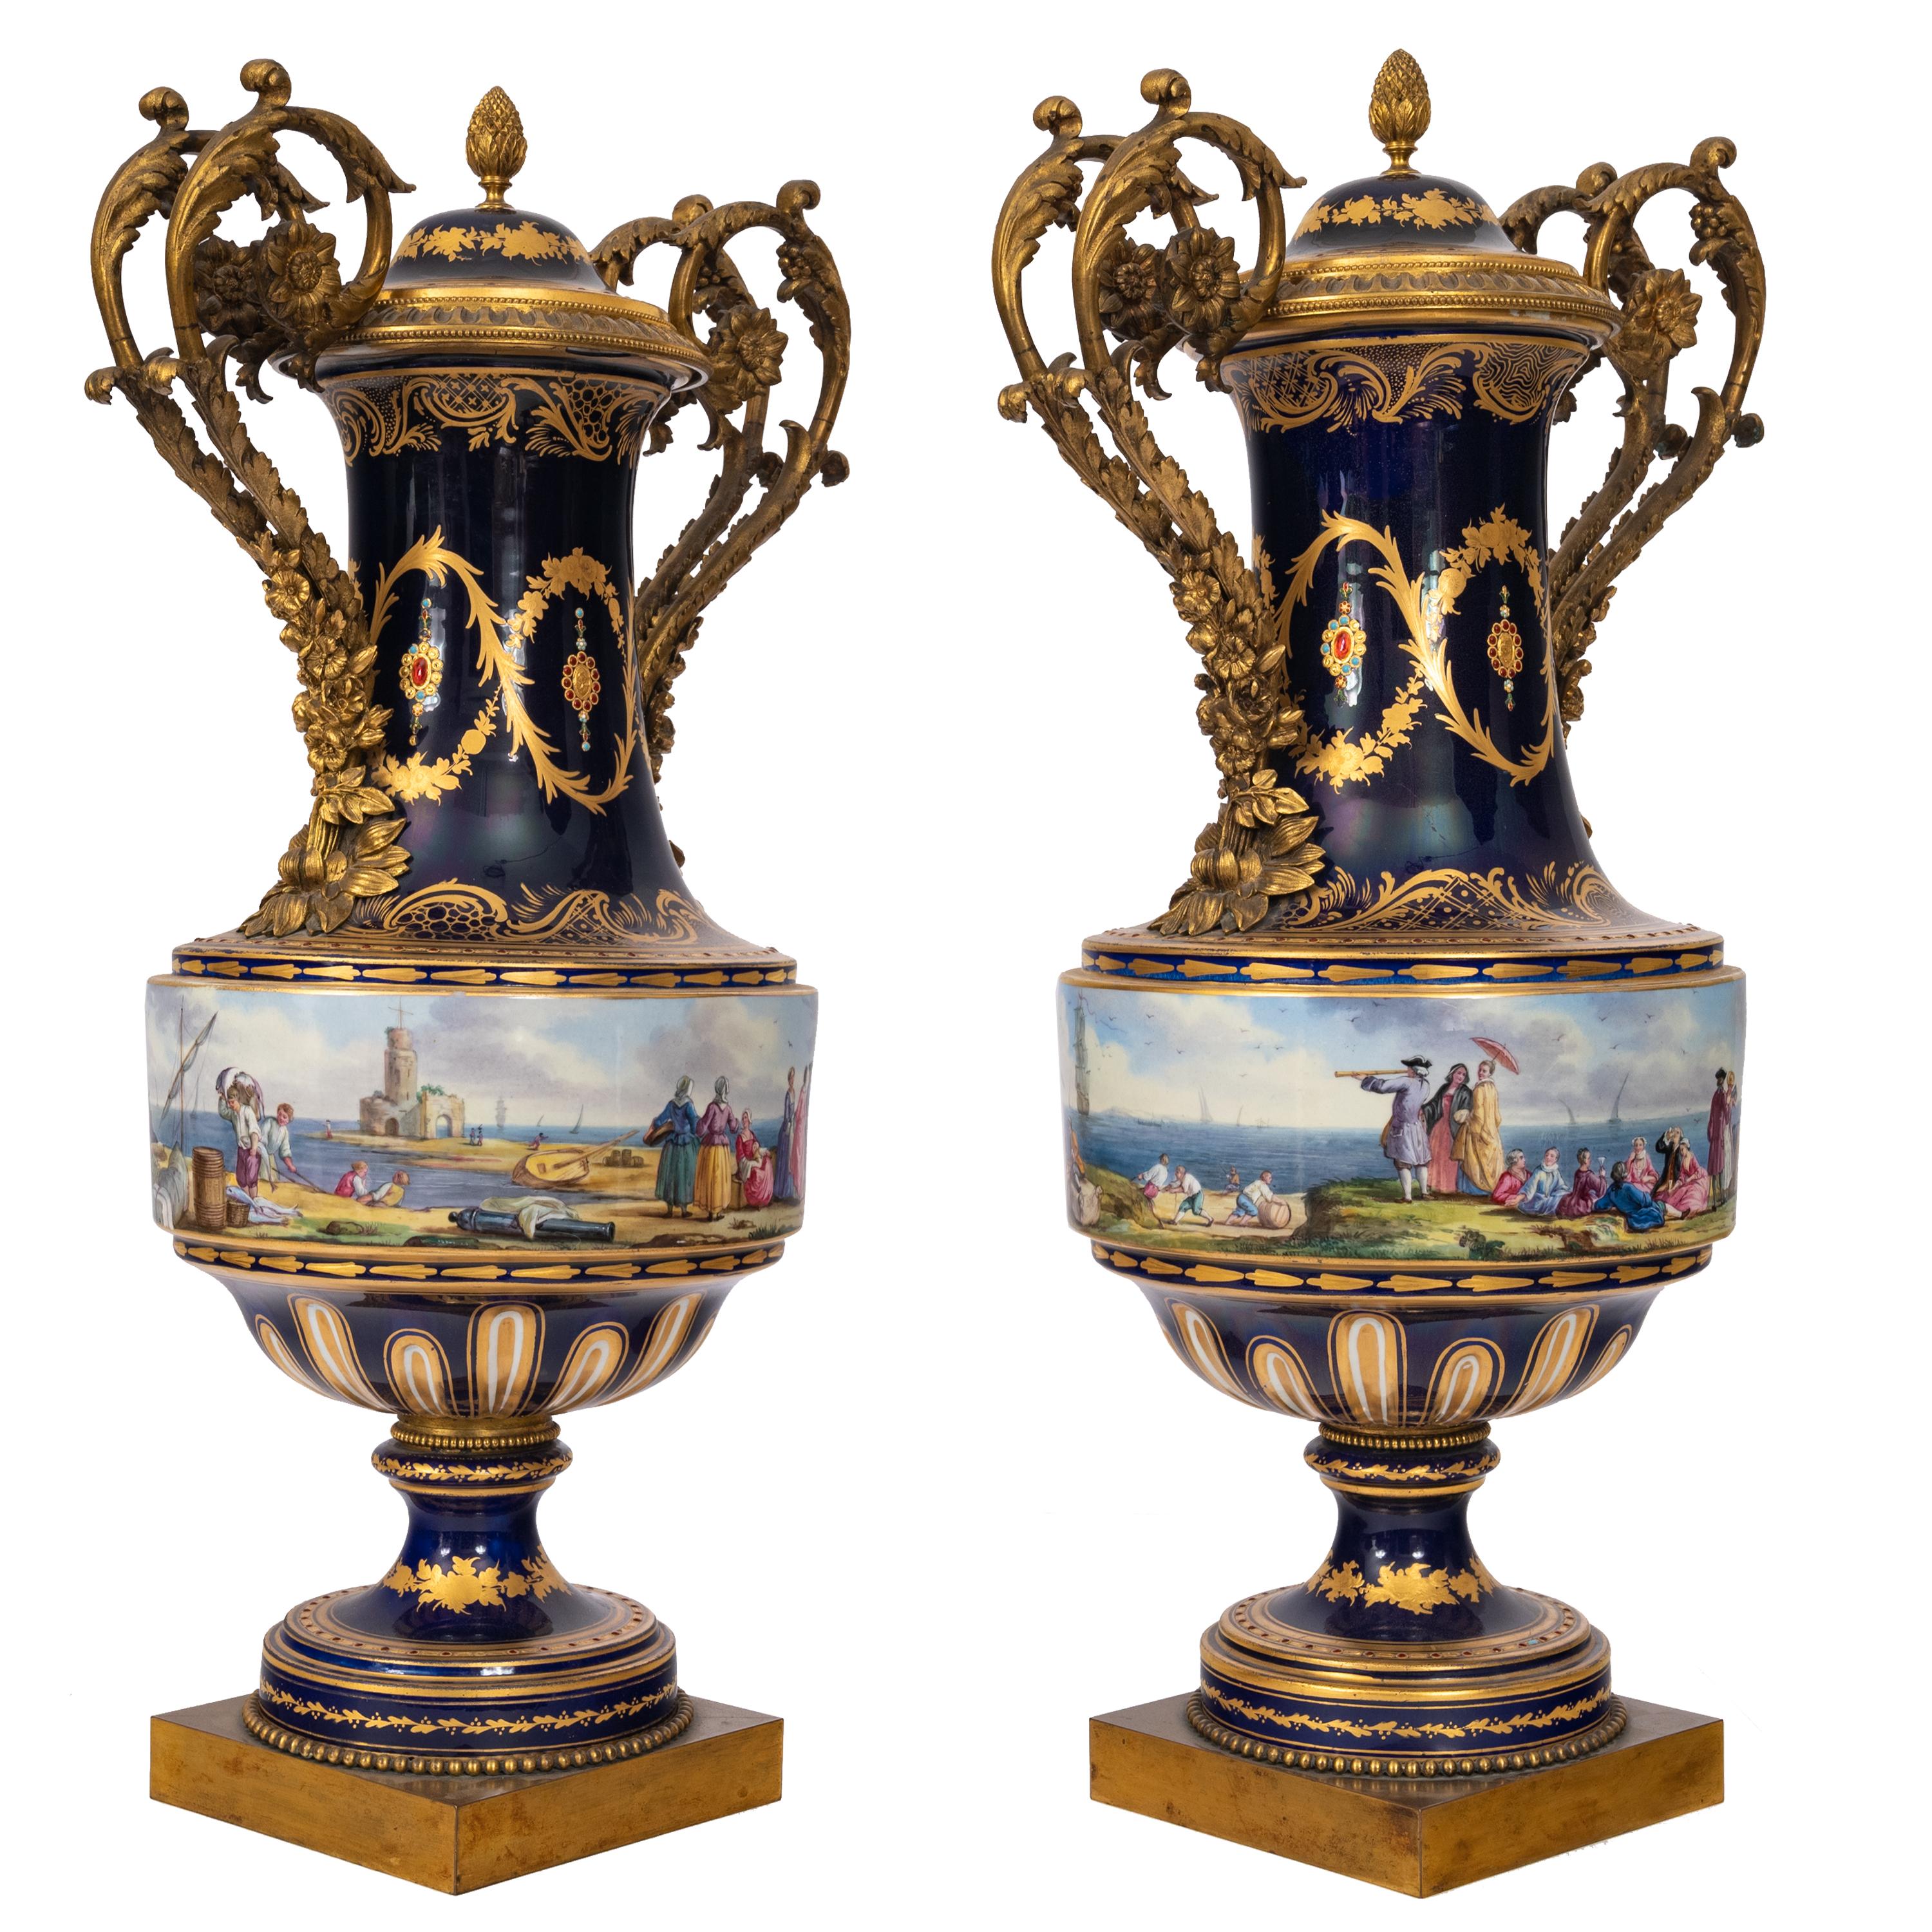 Rococo Revival Pair 19th Century Monumental Antique Sevres French Porcelain Ormolu Urns 1860 For Sale